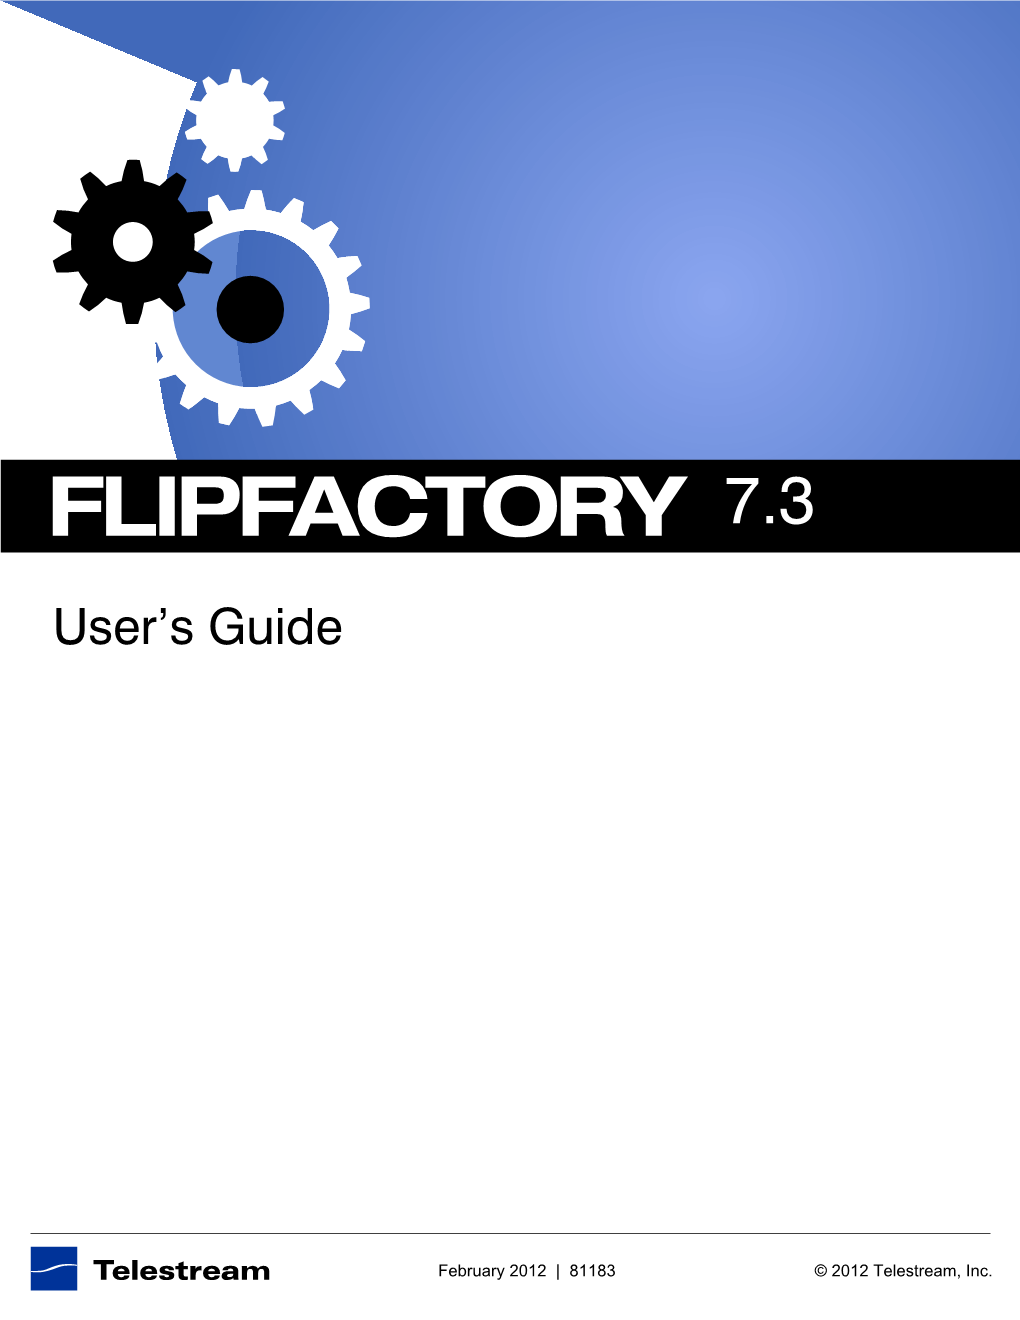 User's Guide/Published Specifications/Product Description